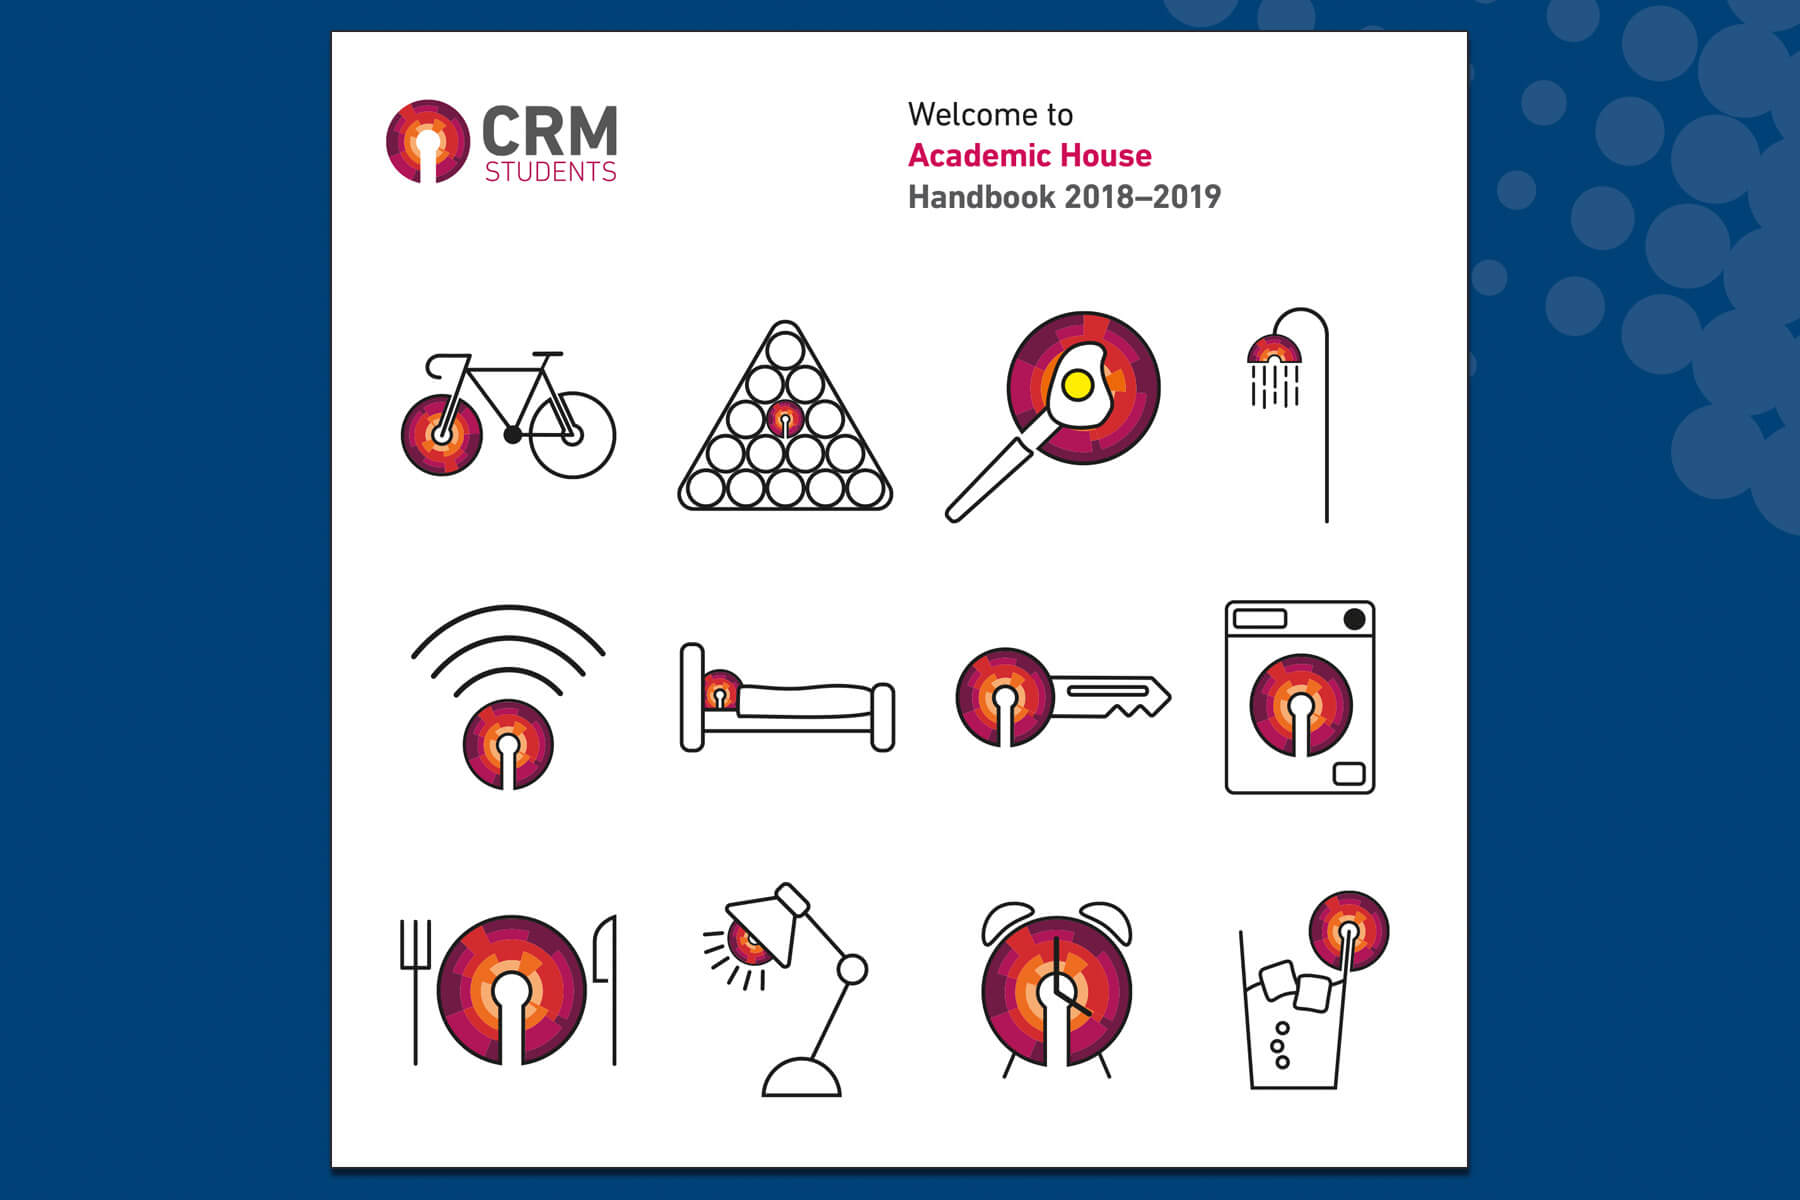 CRM Students move in handbook cover